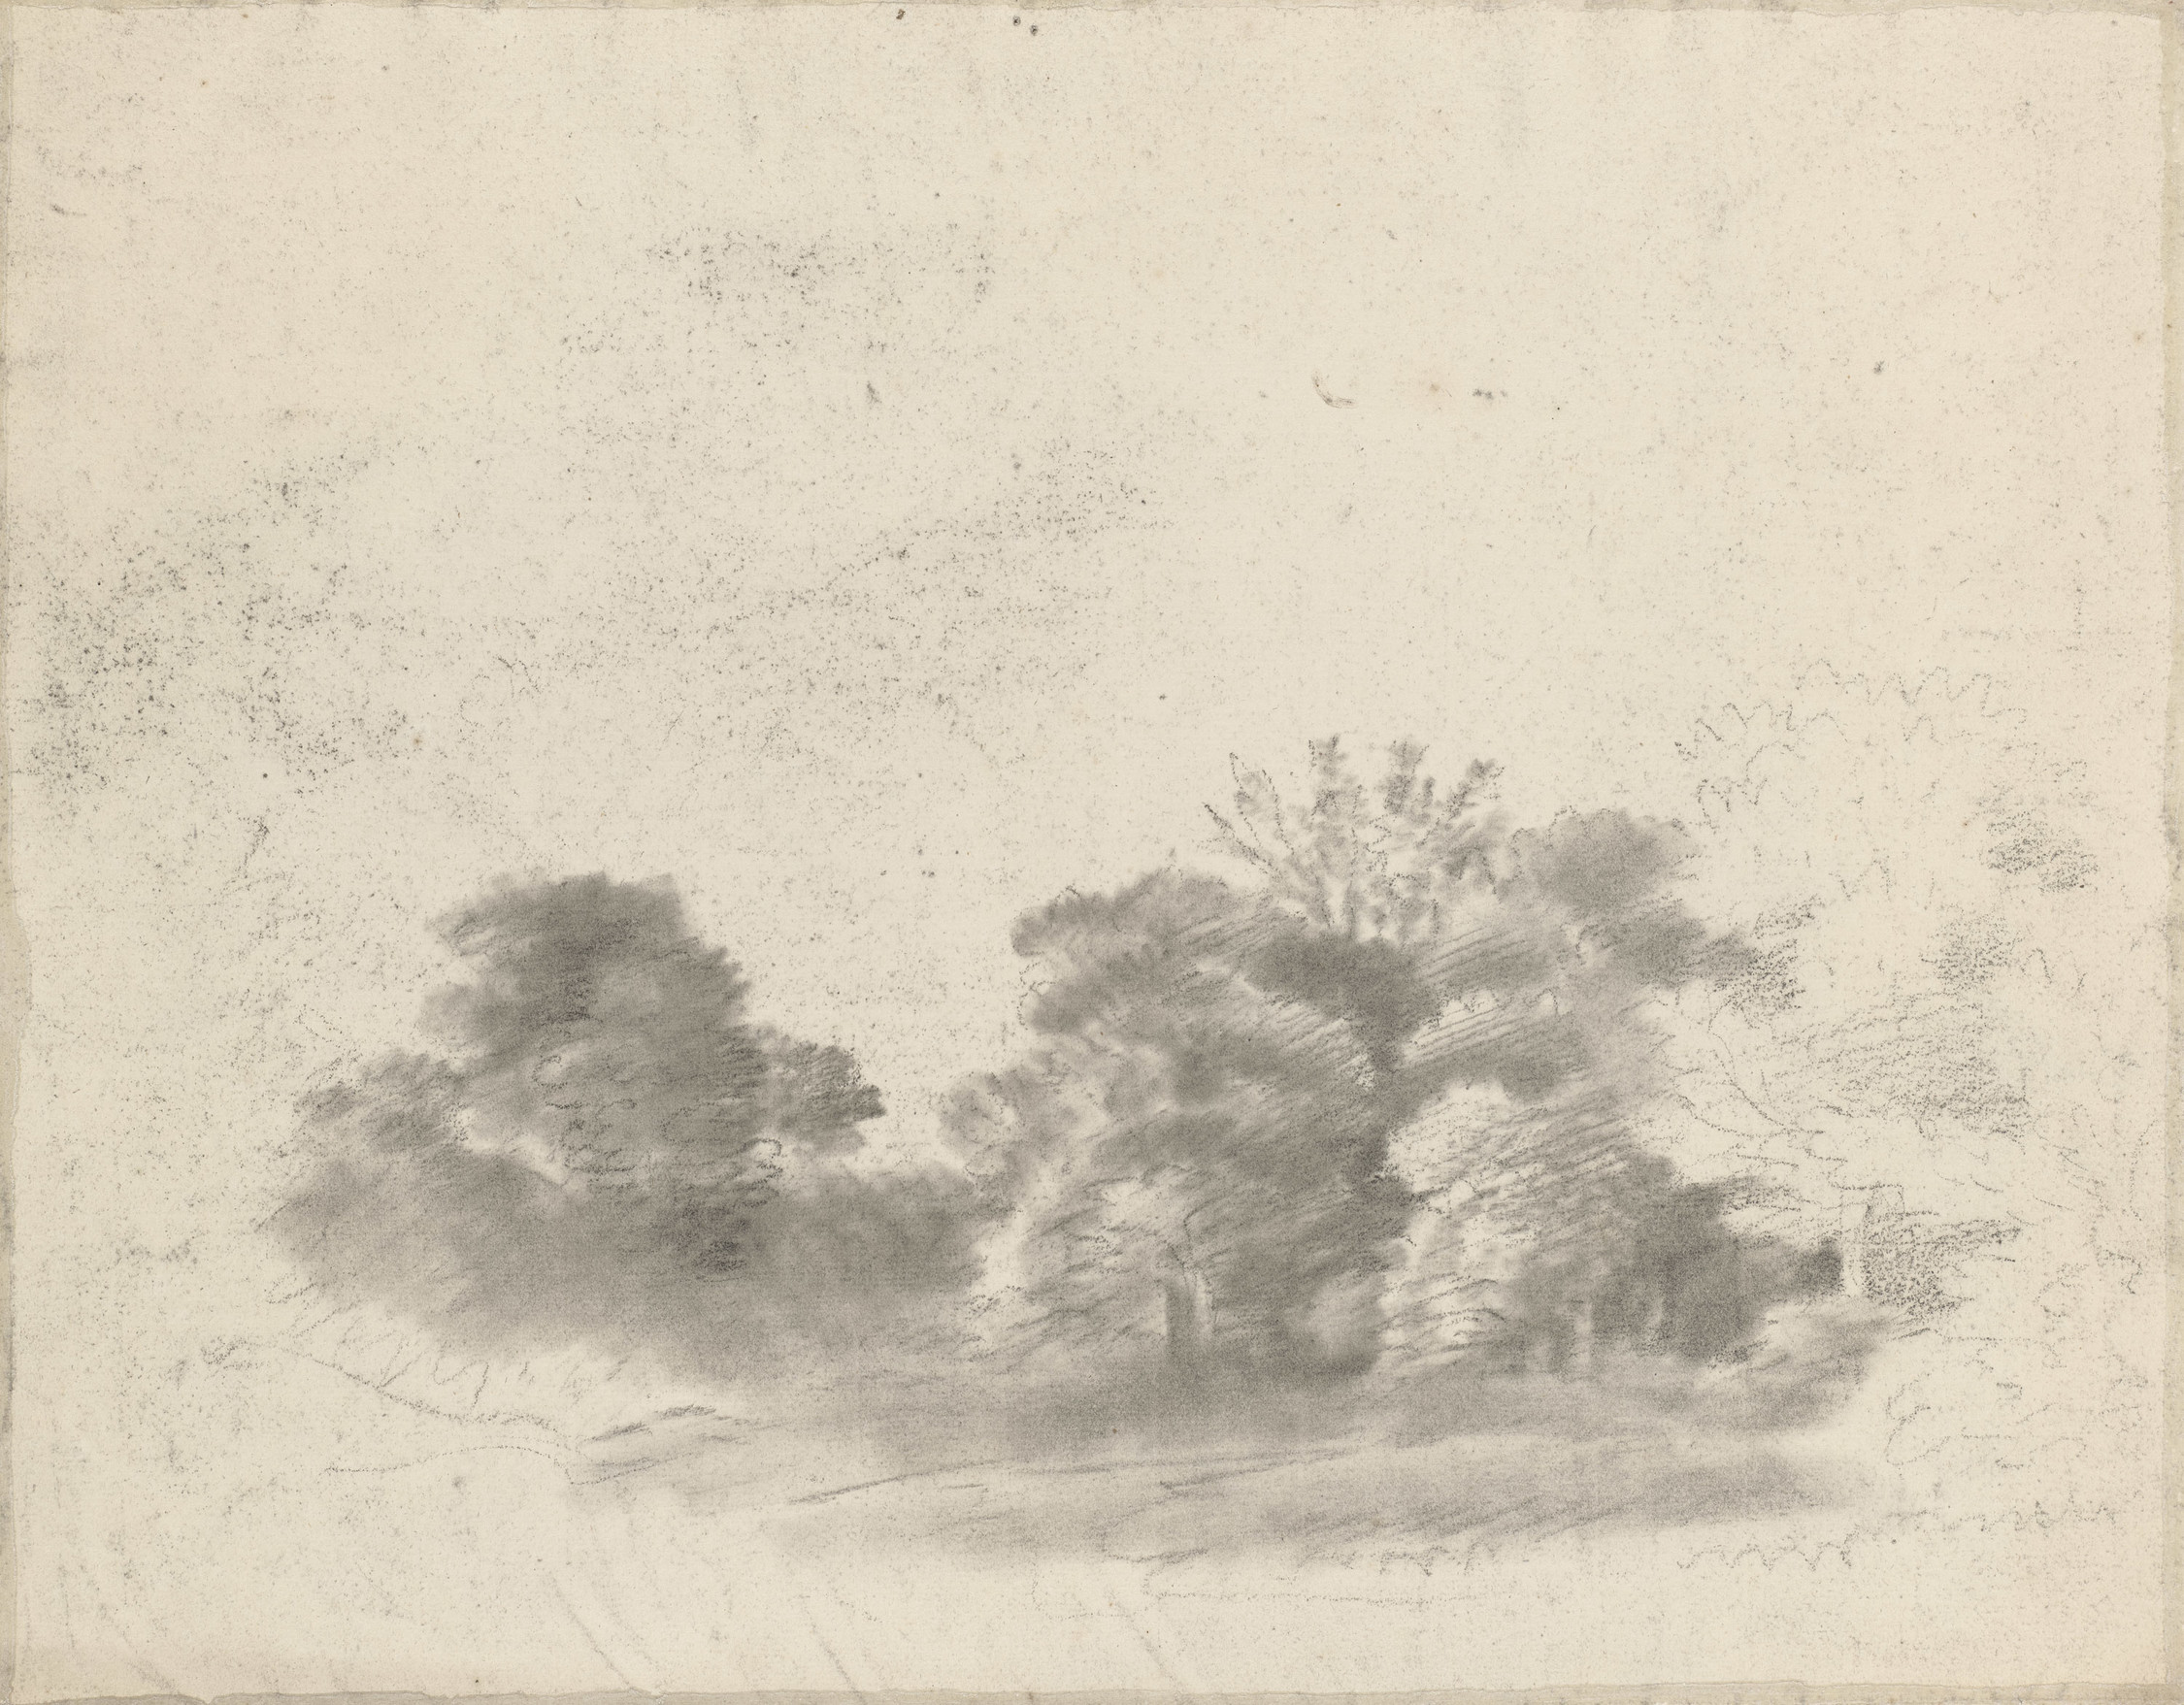 A&nbsp;drawing in black&nbsp;chalk and stump&nbsp;showing trees and a path winding into the distance. On the verso, a drawing of trees, softened with stump. 
This drawing bears strong similarities to other landscape drawings by Gainsborough from the 1740s